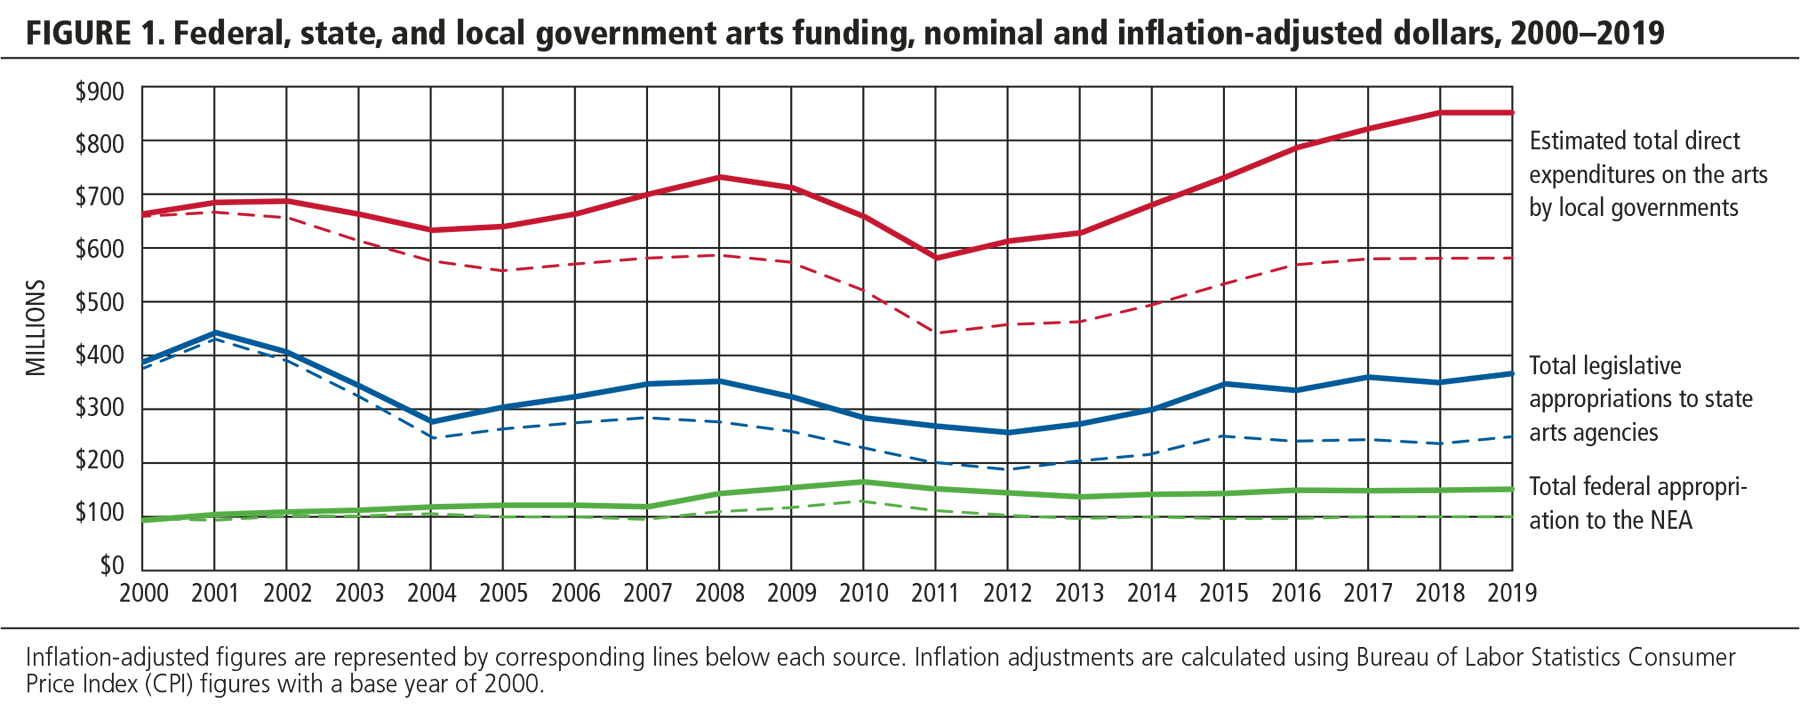 FIGURE 1. Federal, state, and local government arts funding, nominal and inflation-adjusted dollars, 2000-2019.